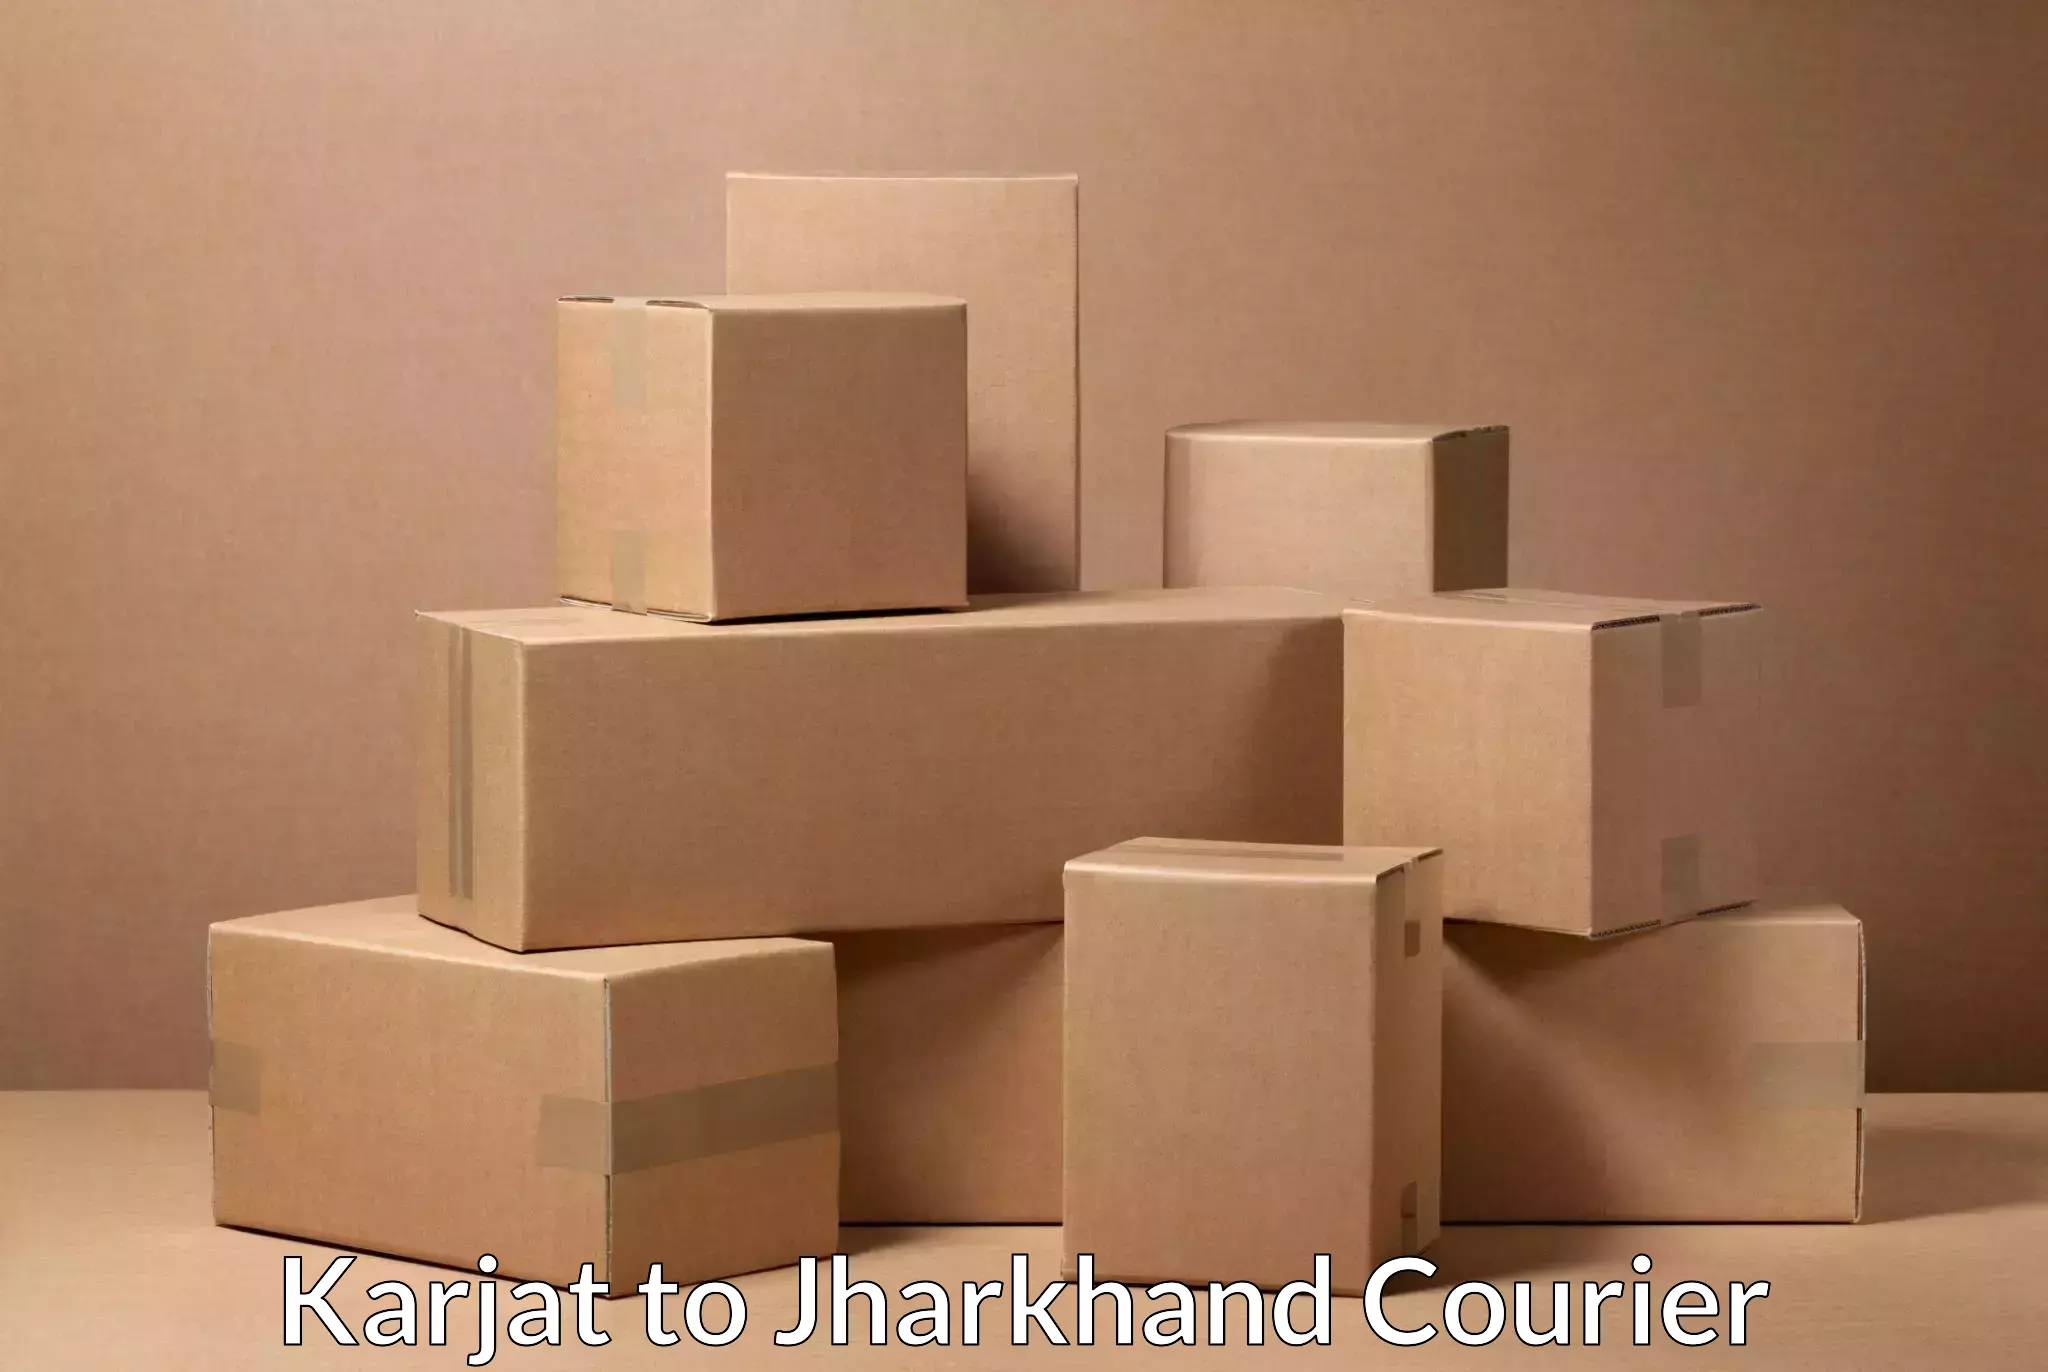 Automated shipping processes in Karjat to Jharkhand